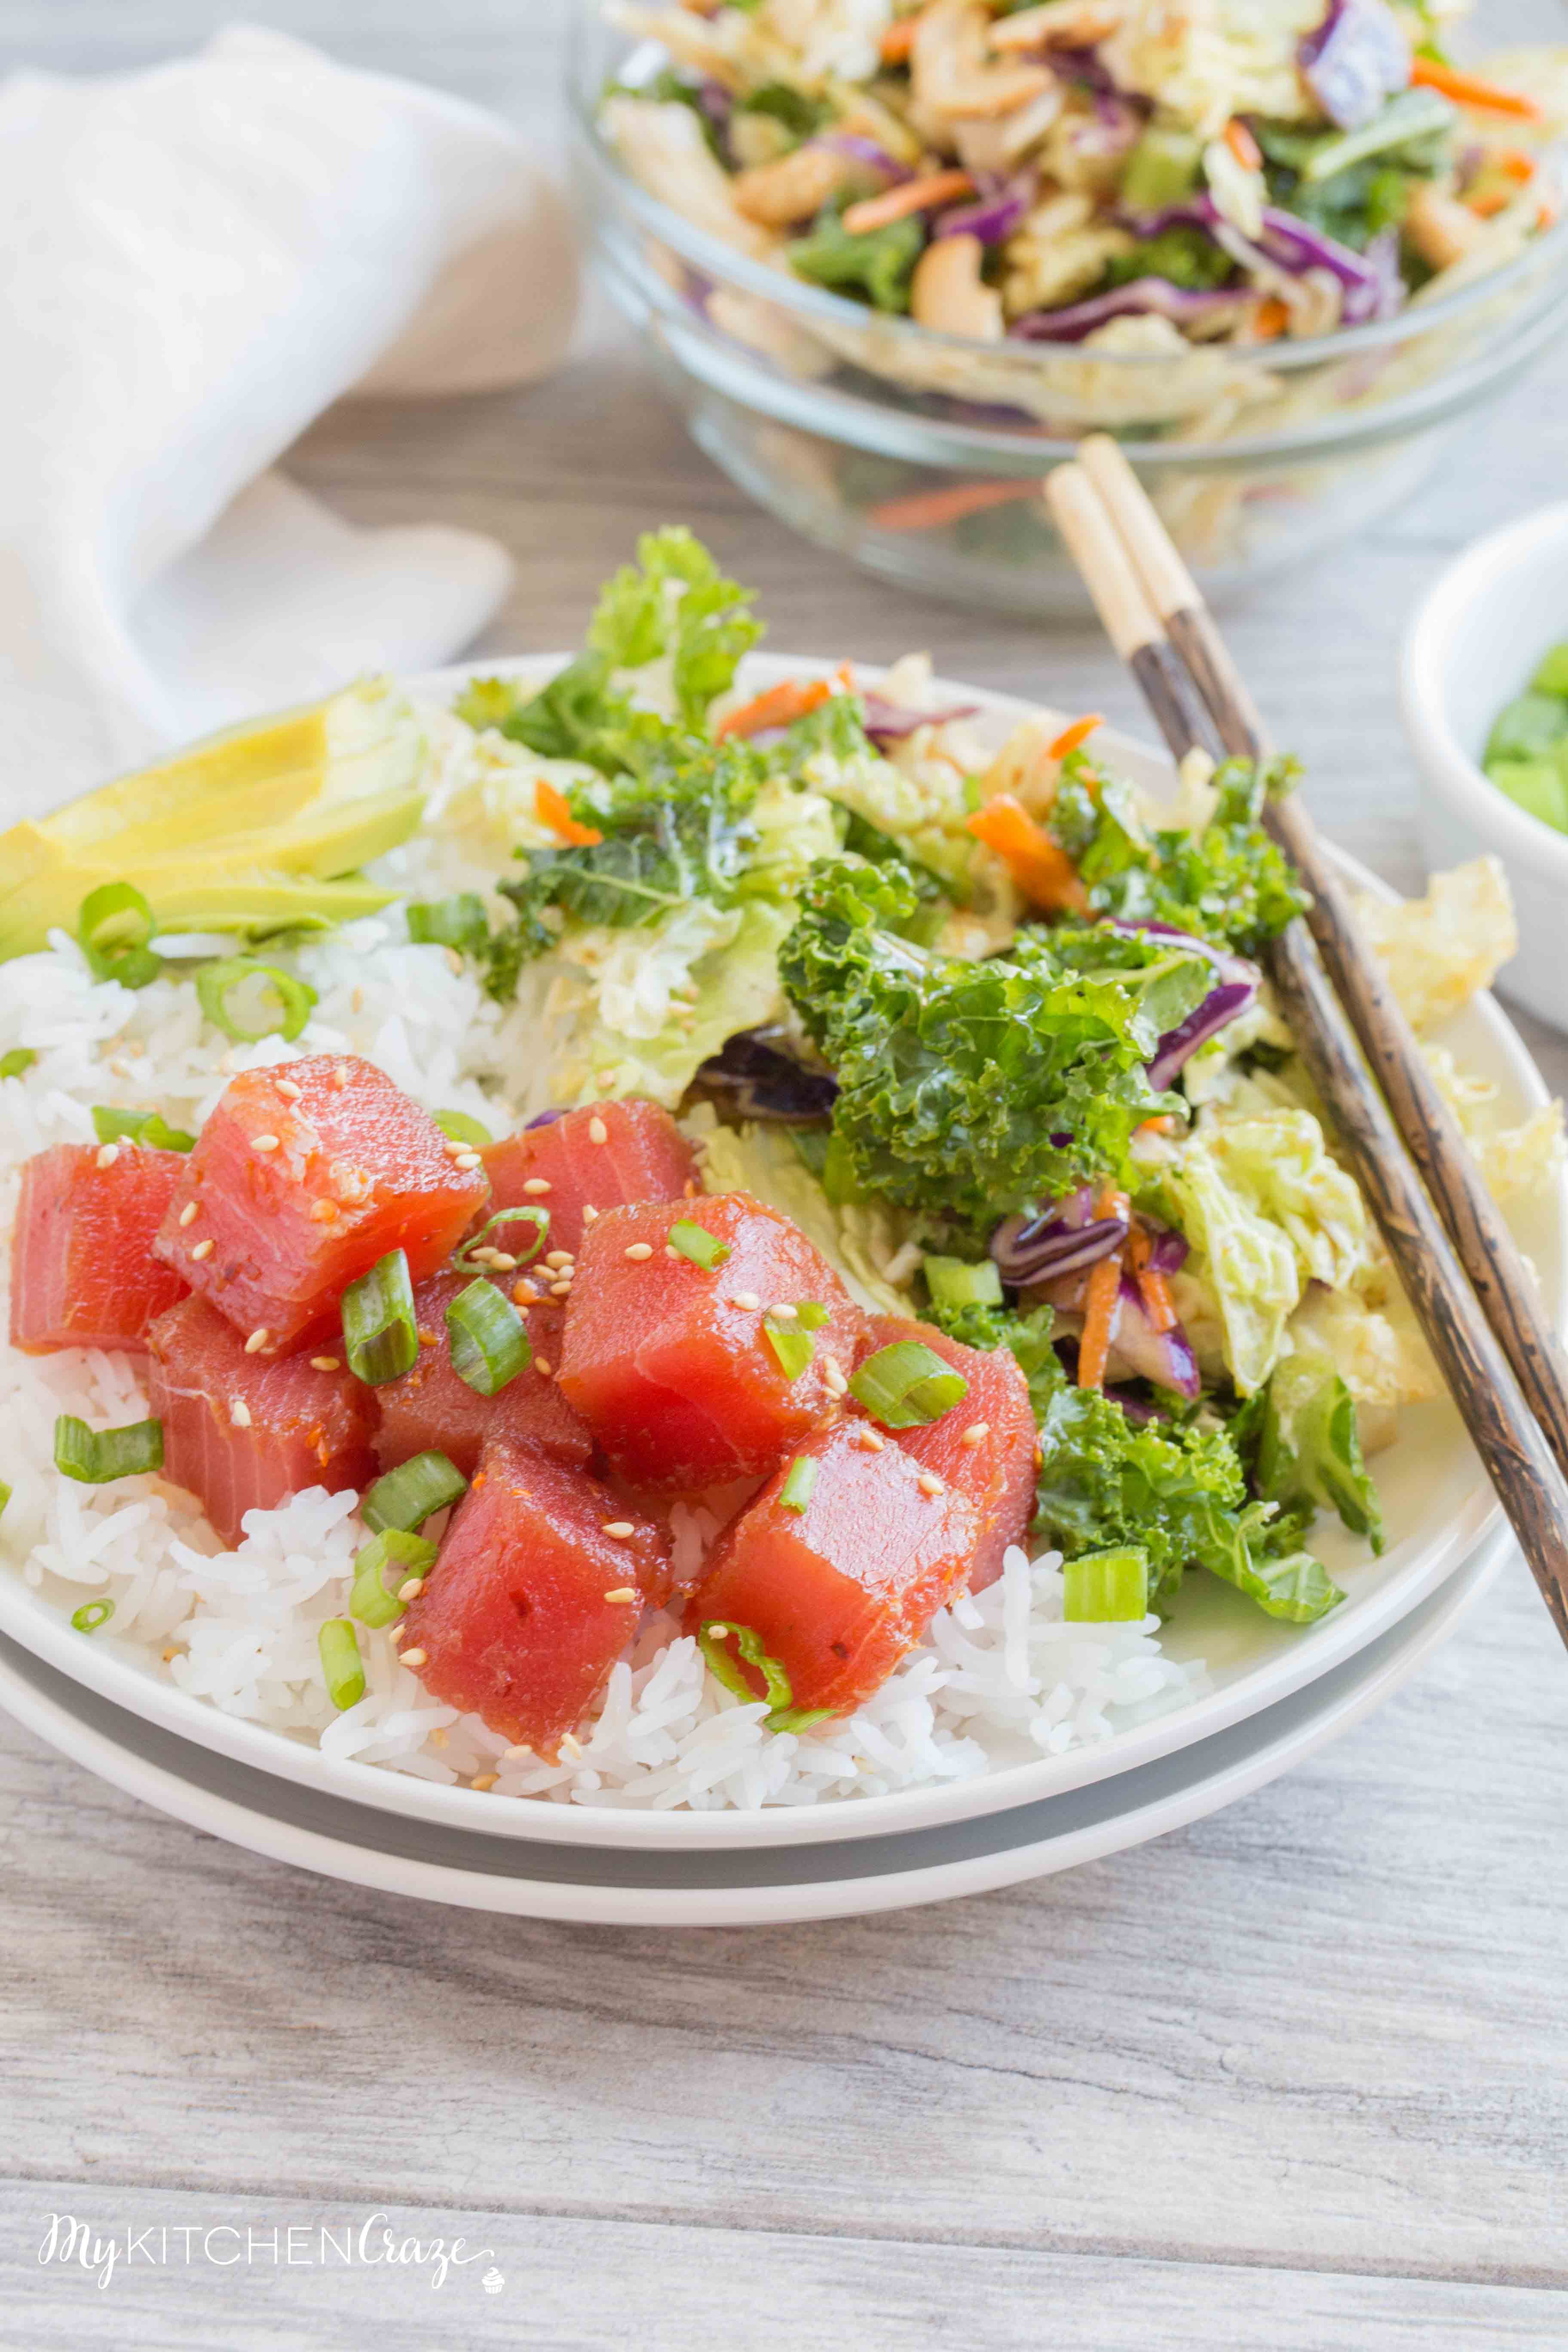 Ahi Tuna Poke Bowls ~ mykitchencraze.com ~ Ahi Tuna Poke Bowls are refreshing and a delicious recipe This easy recipe is great for parties or to enjoy as a family meal.